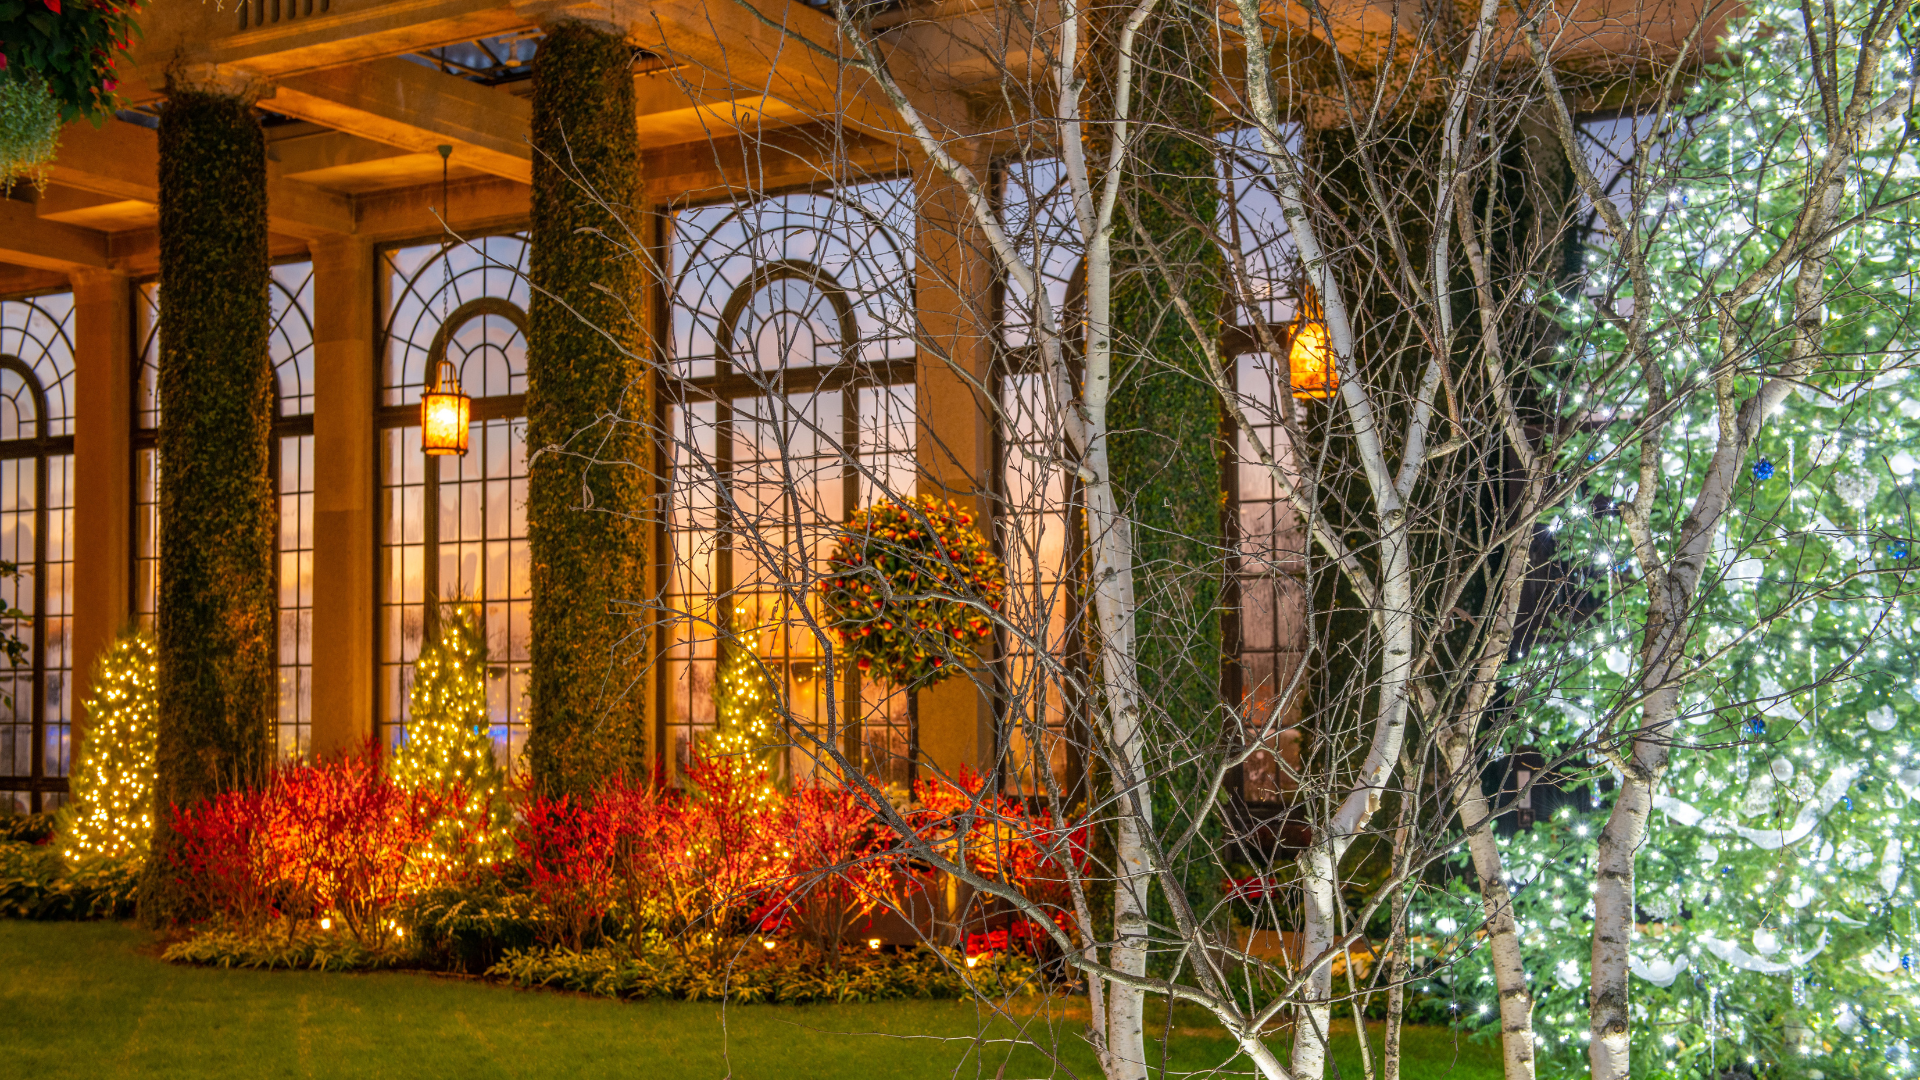 Featured image for “Longwood Gardens to bring holiday cheer, botanical splendor”